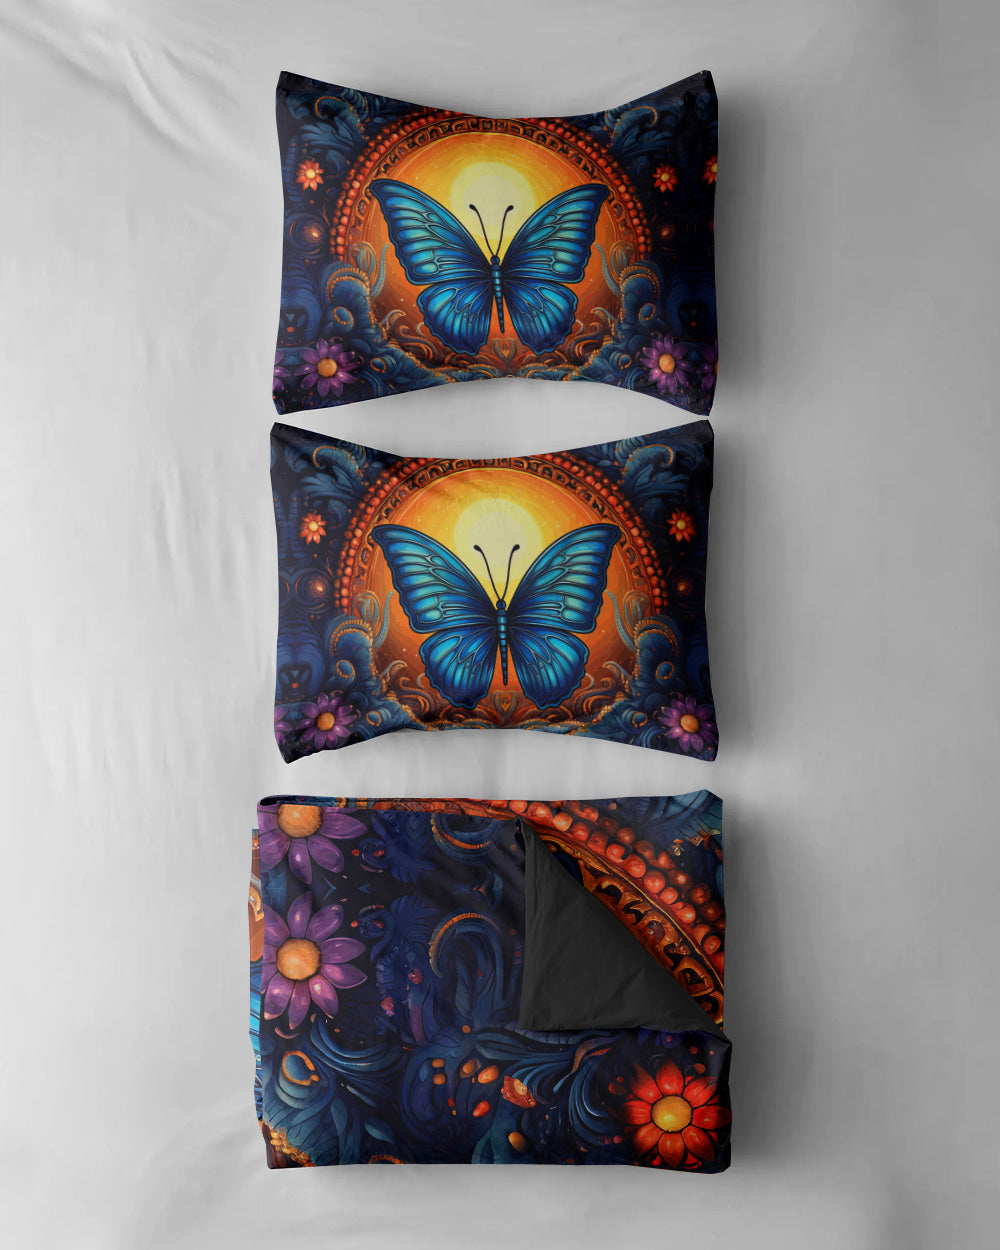 BUTTERFLY AND MOON BEDDING SET - TYTD2108233